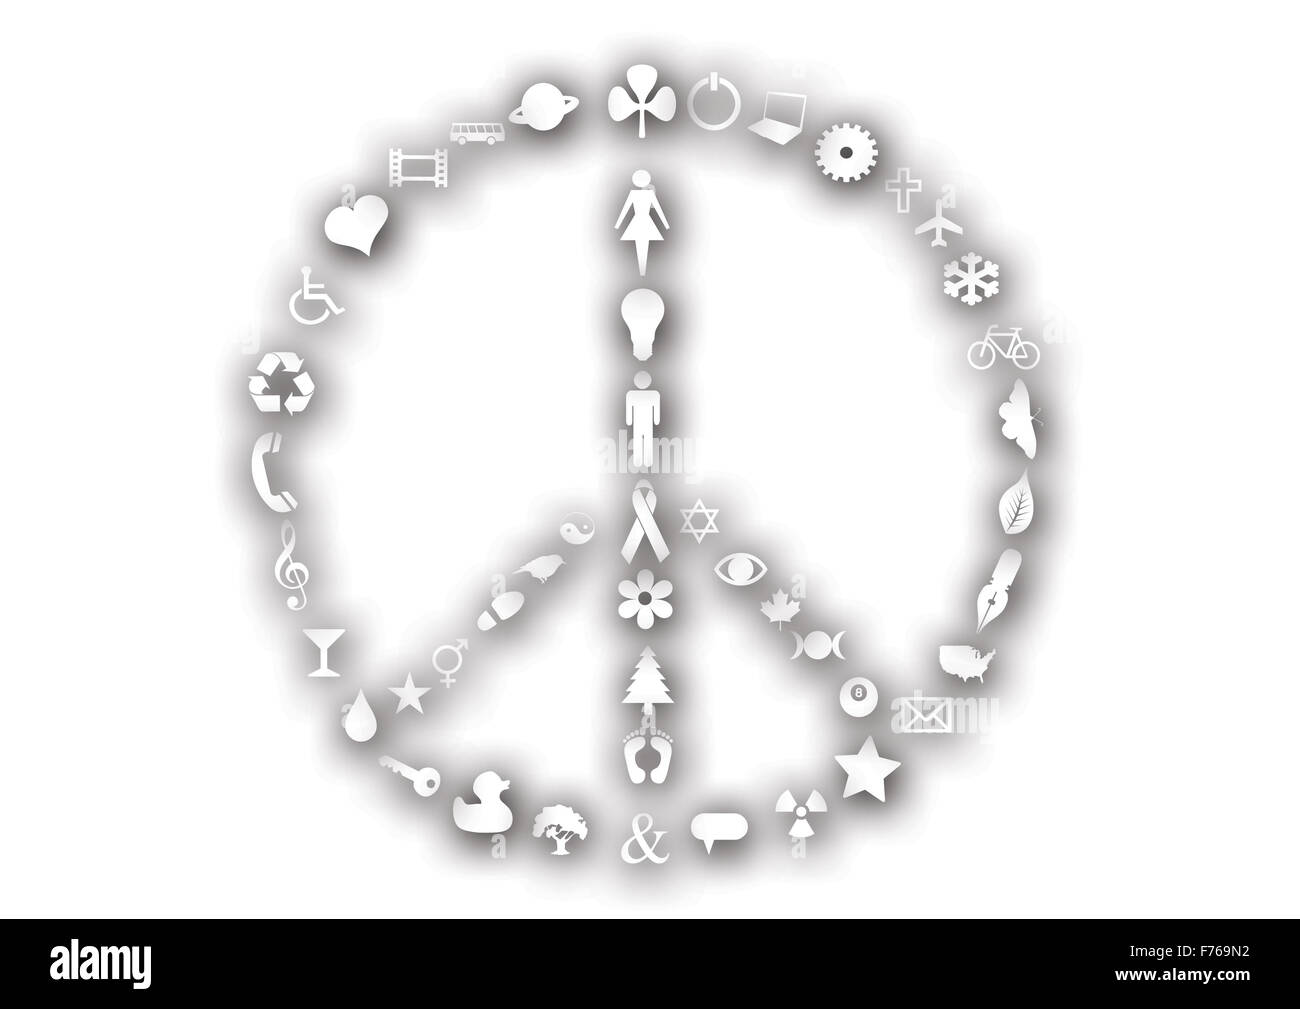 Peace sign made of icons Stock Photo